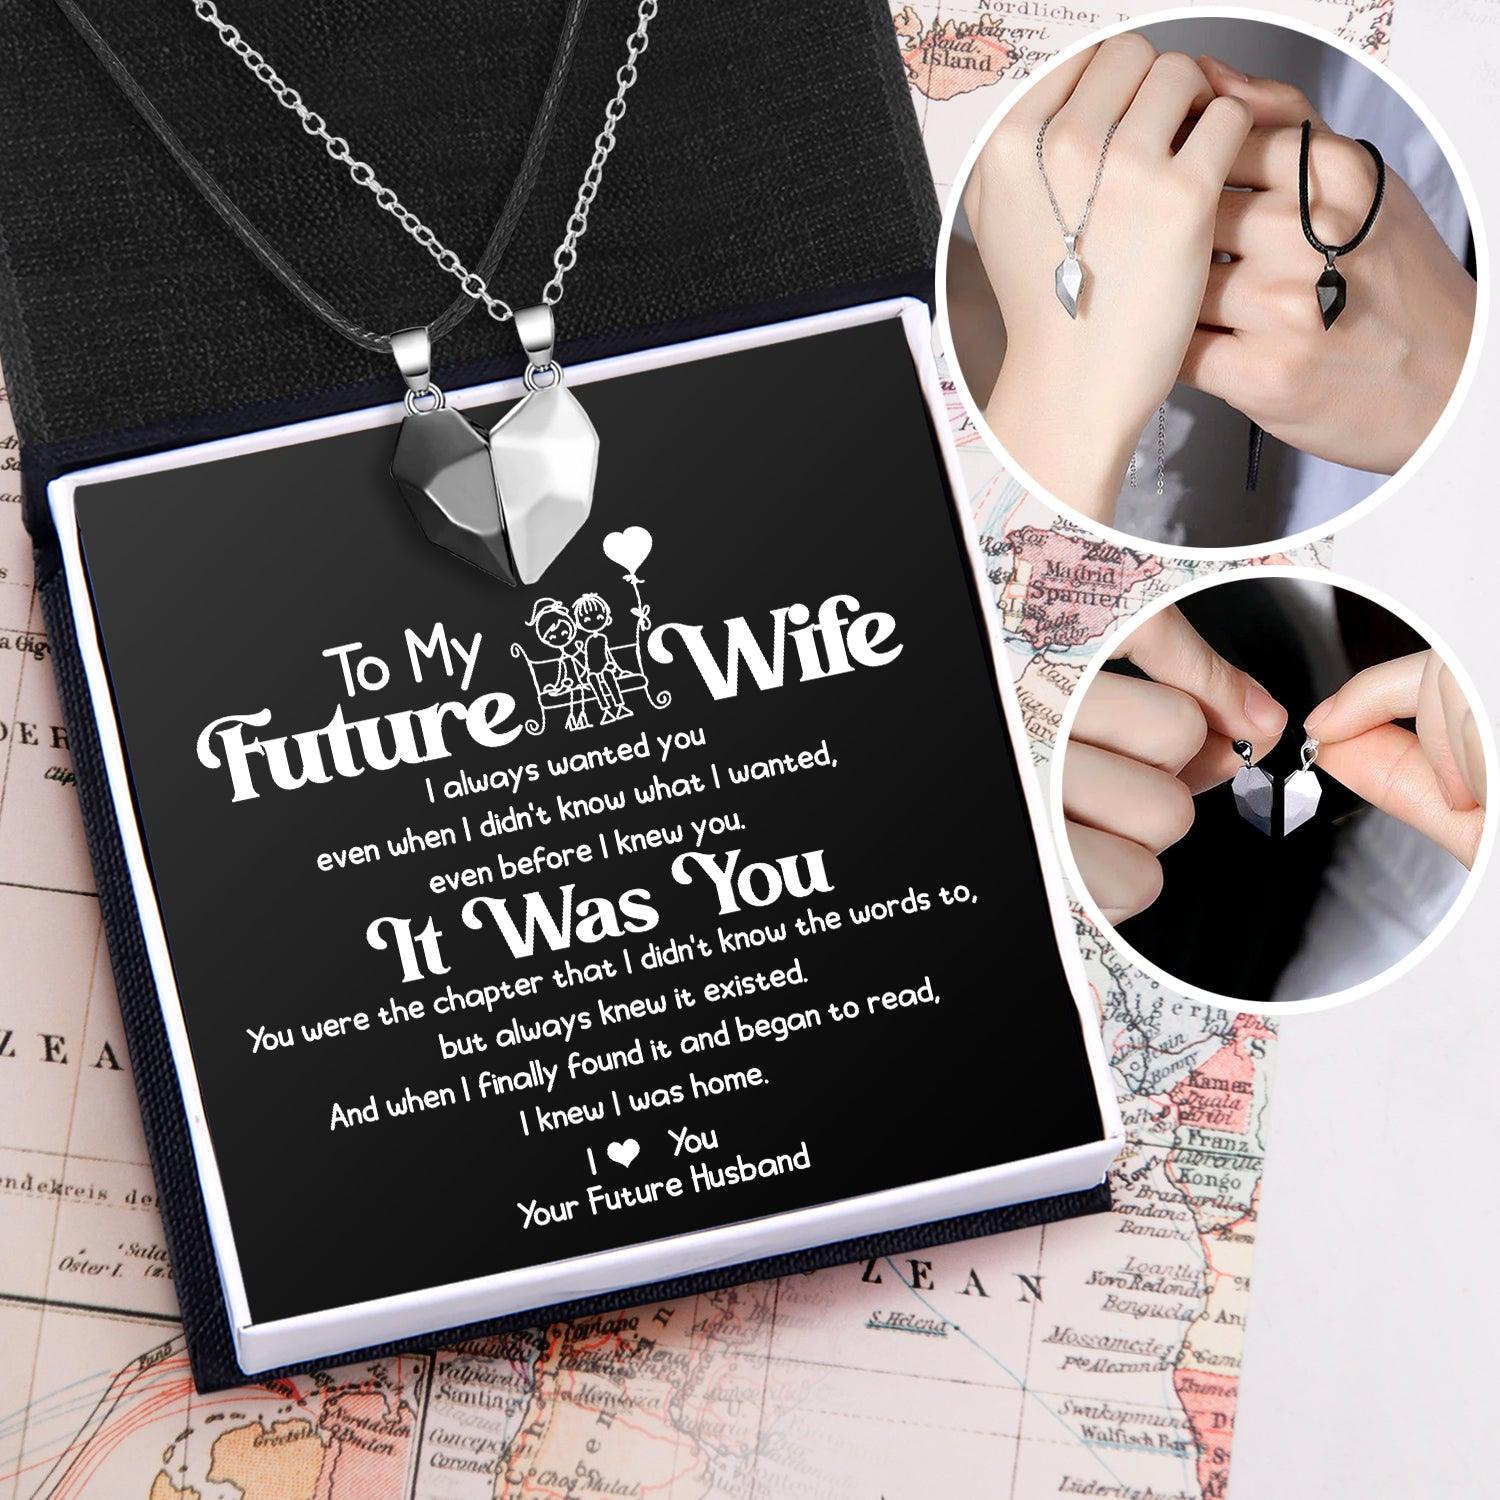 Magnetic Love Necklaces - Family - To My Future Wife - I Love You - Augnni25003 - Gifts Holder